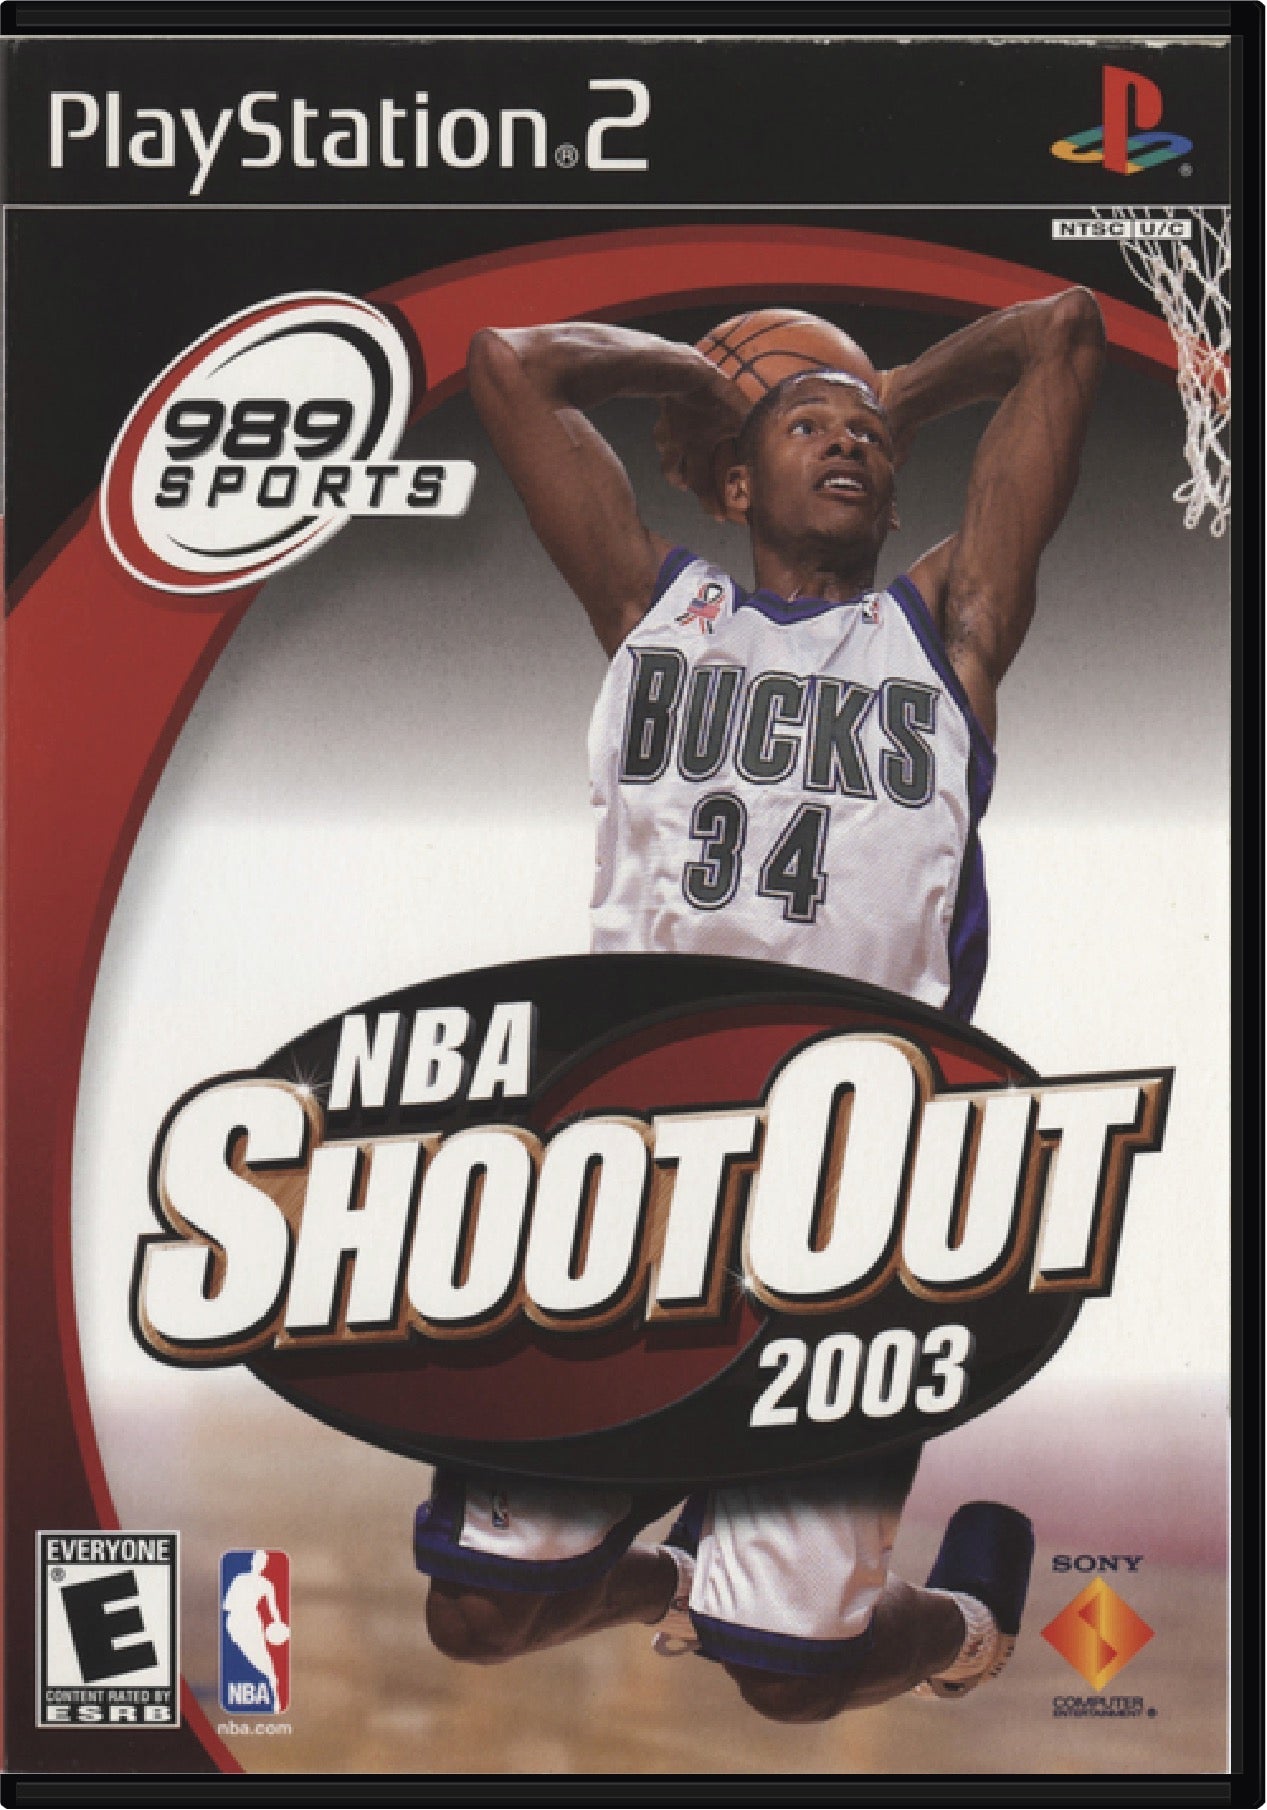 NBA Shootout 2003 Cover Art and Product Photo